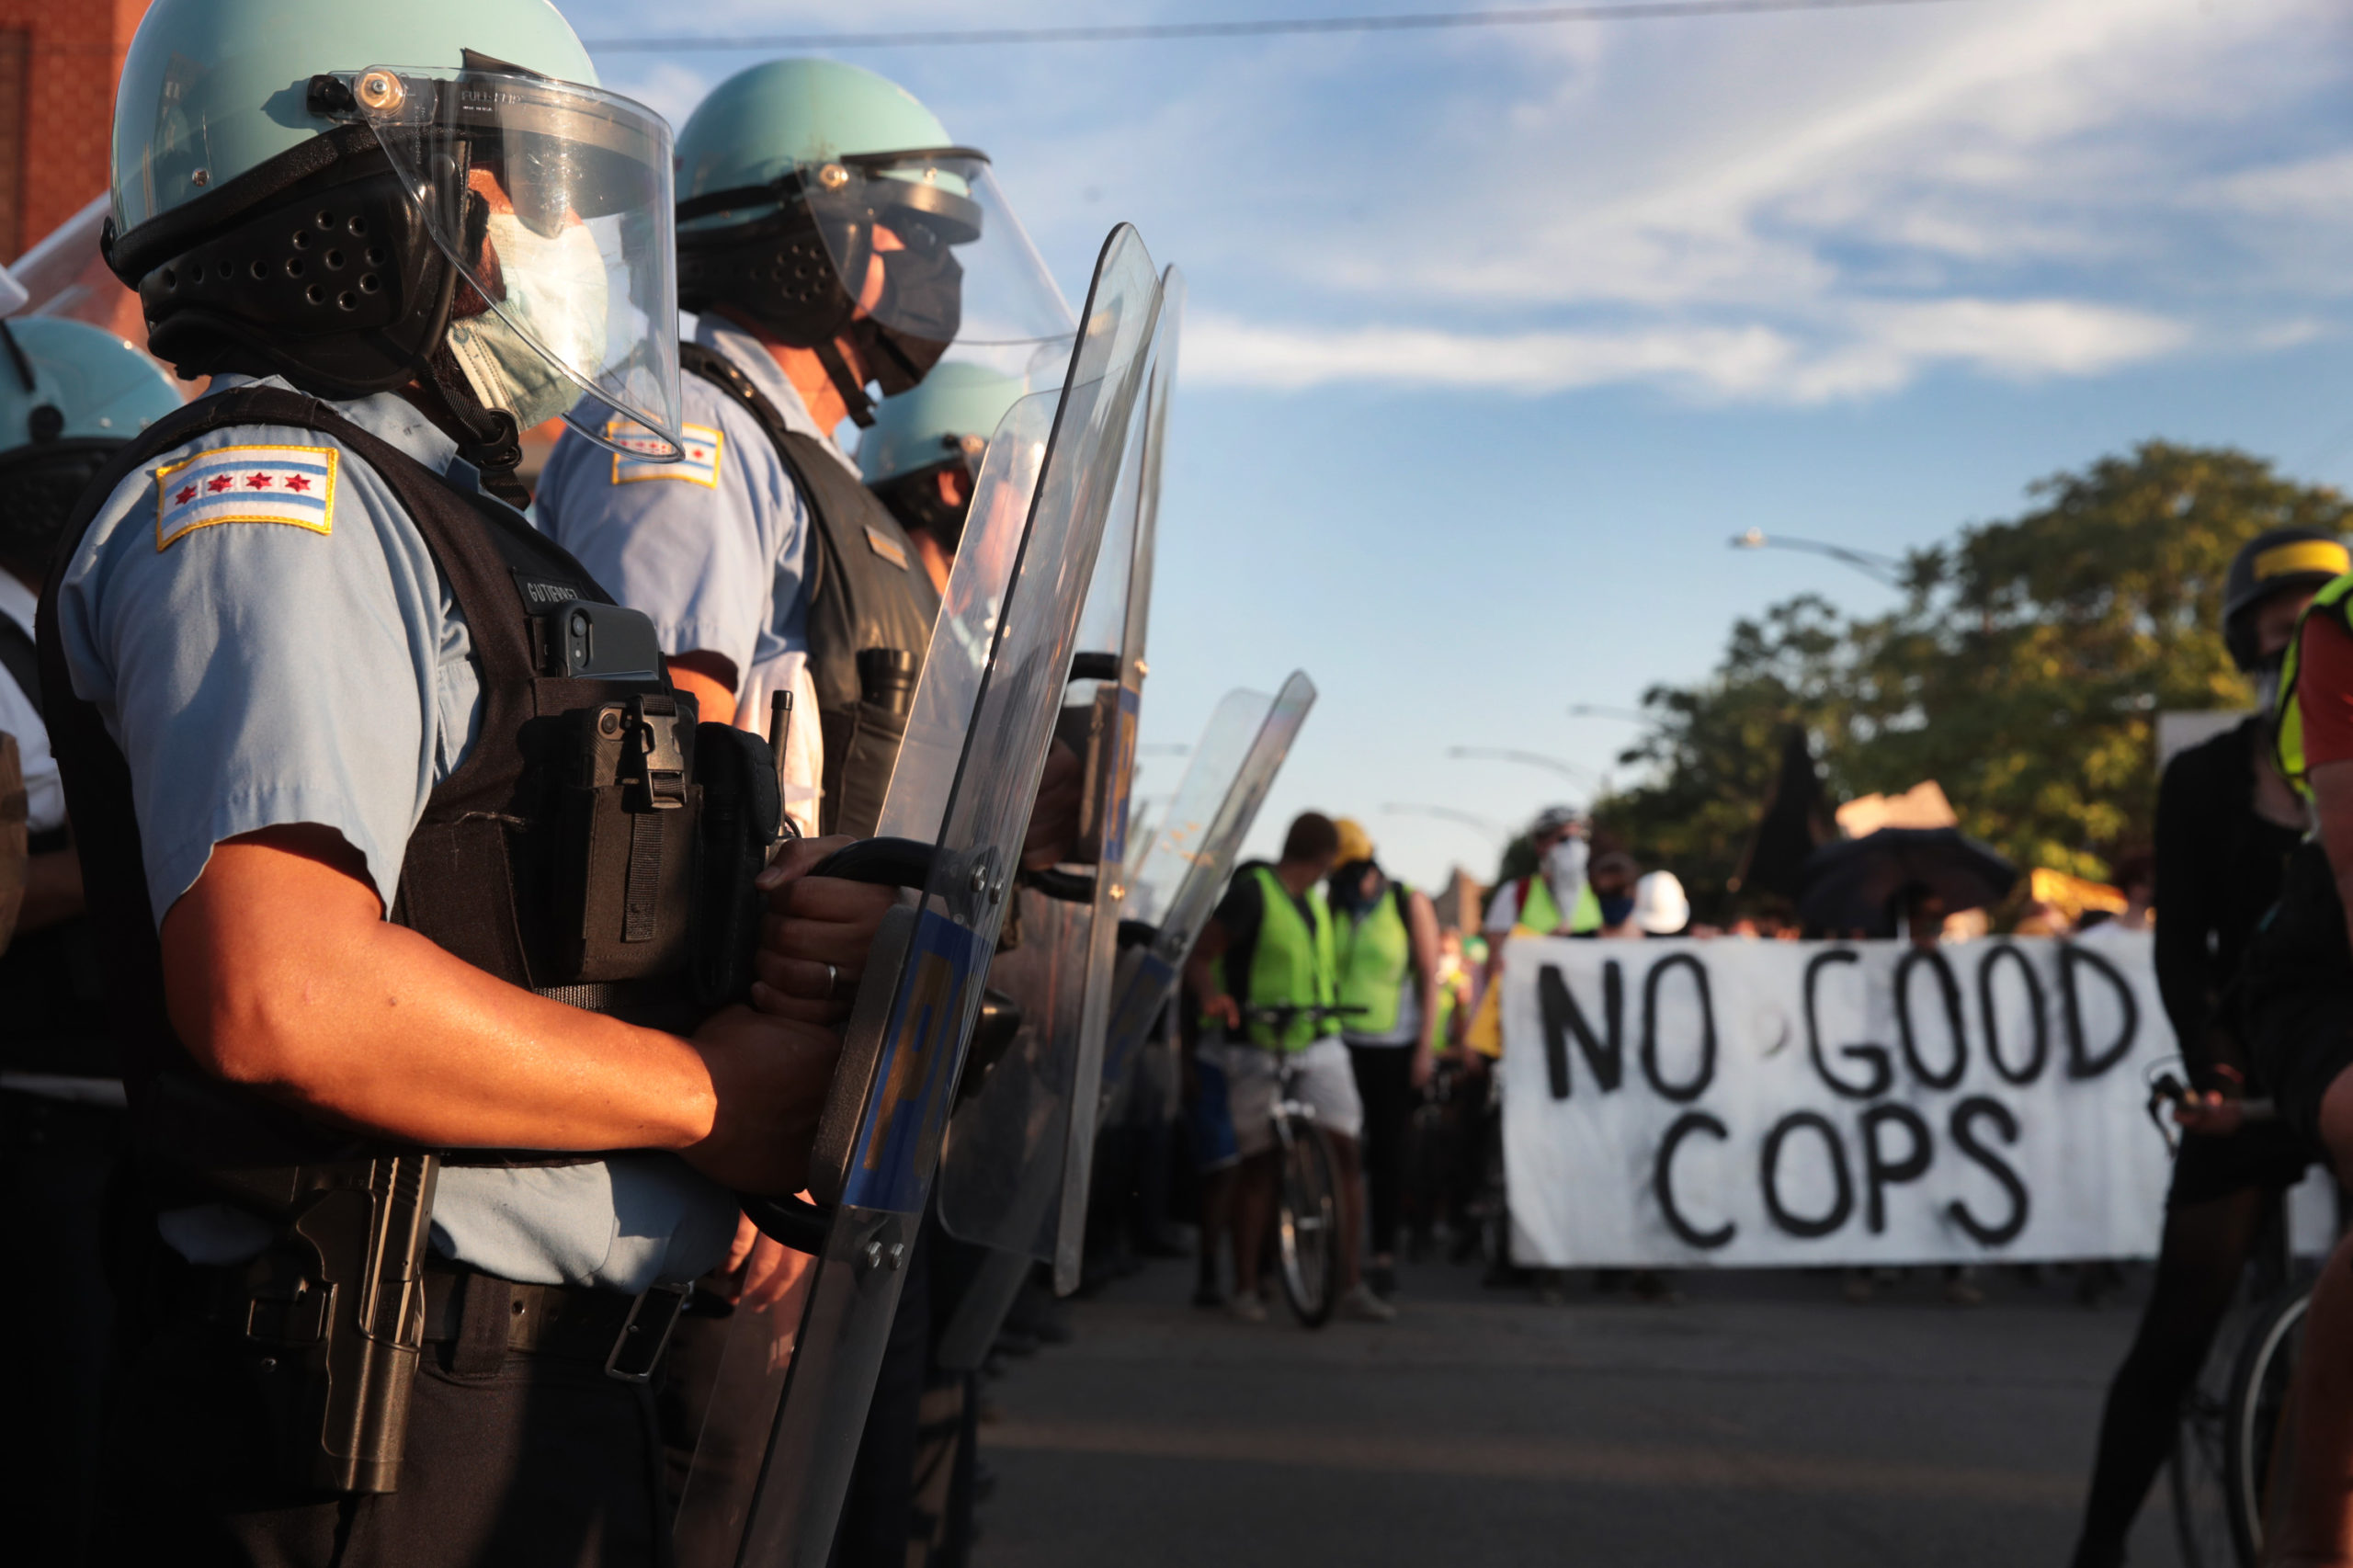 Police stand guard at the Homan Square police station while activists hold a rally calling for the defunding of police on July 24, 2020 in Chicago, Illinois. The annual budget for the Chicago Police Department is more than $1.6 billion. (Photo by Scott Olson/Getty Images)